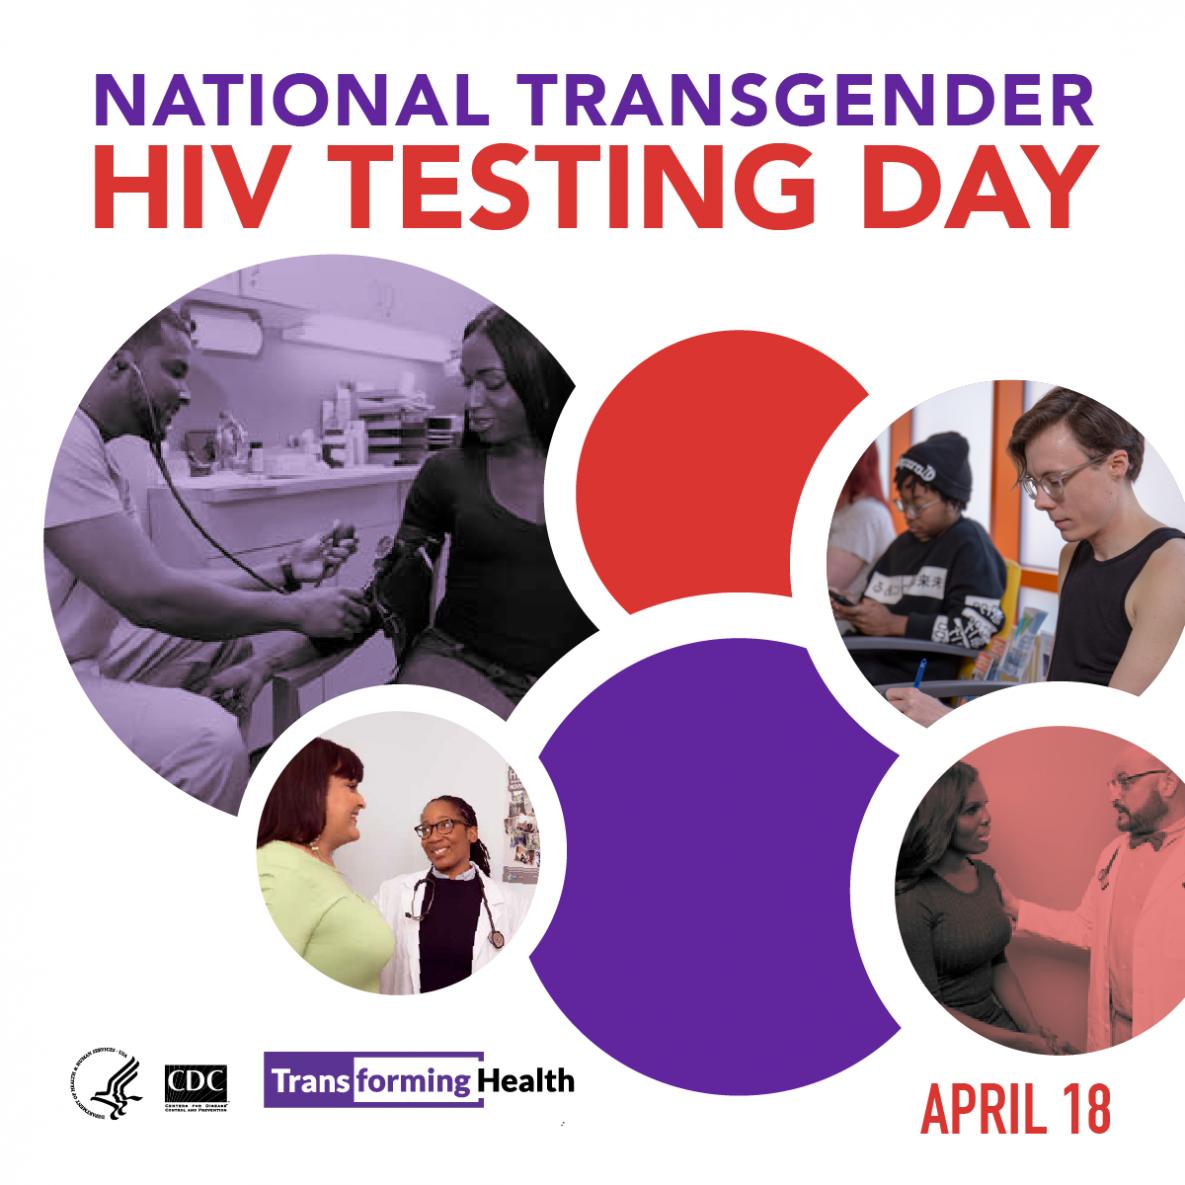 It's National Transgender HIV Testing Day. Call 929-400-7SEX to learn more and find a testing location near you! #NTHTD